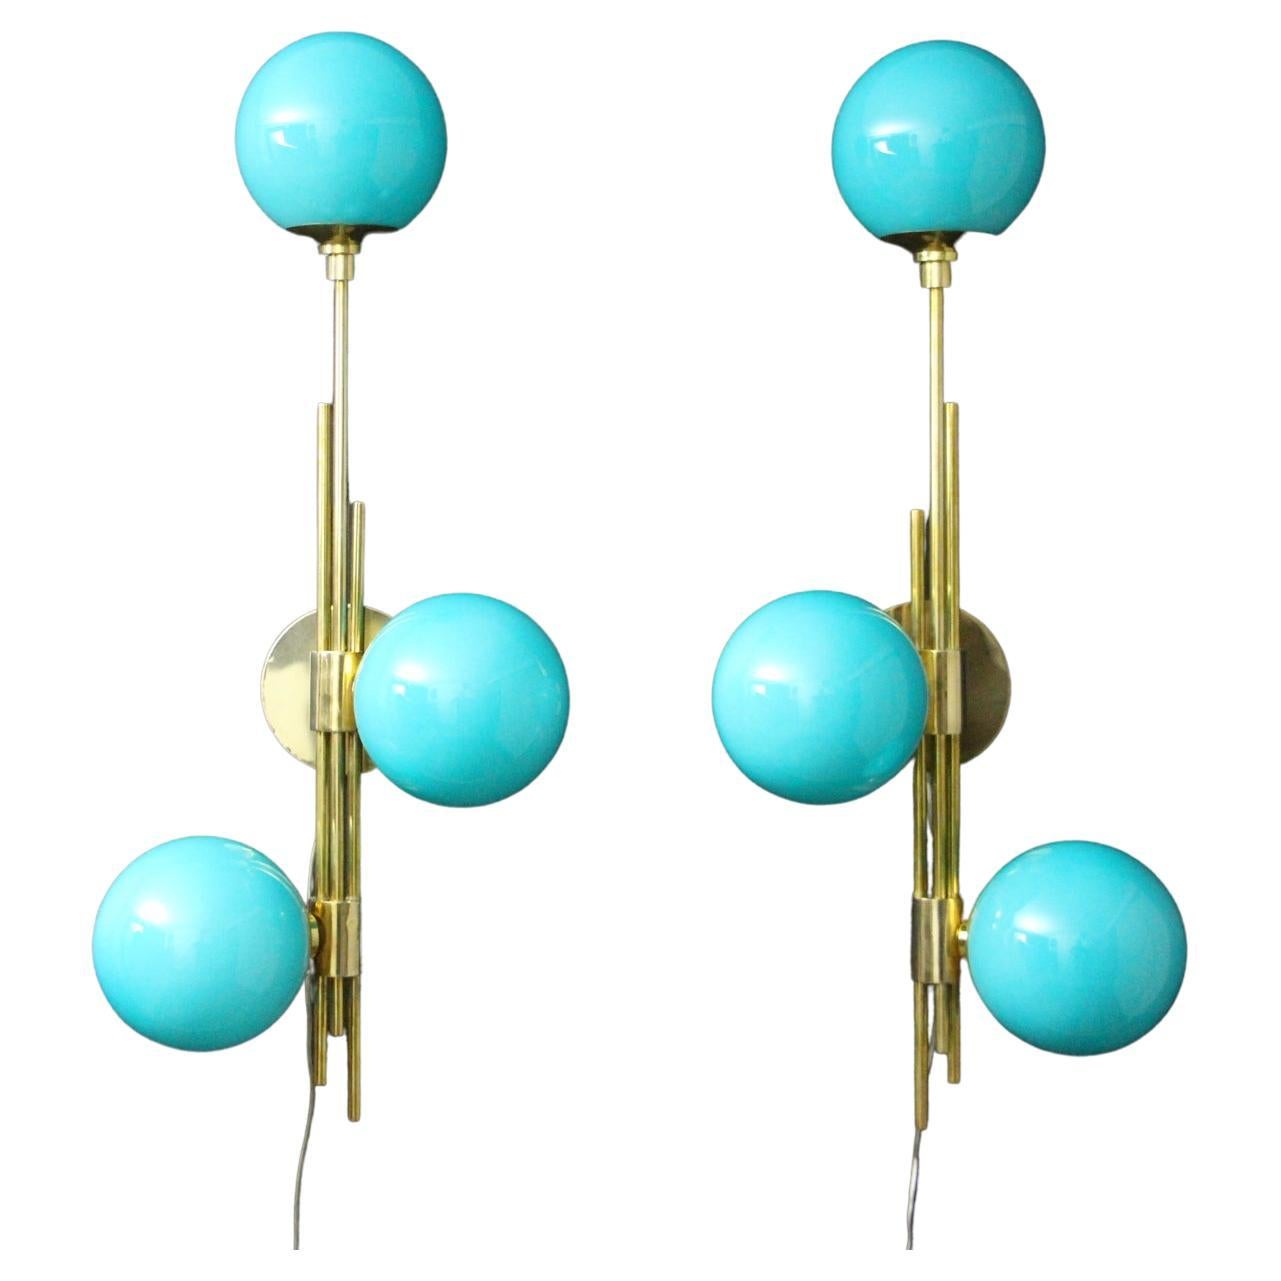 Modern Mid-Century Brass and Turquoise Tiffany Blue Glass Sconces, Wall Lights For Sale